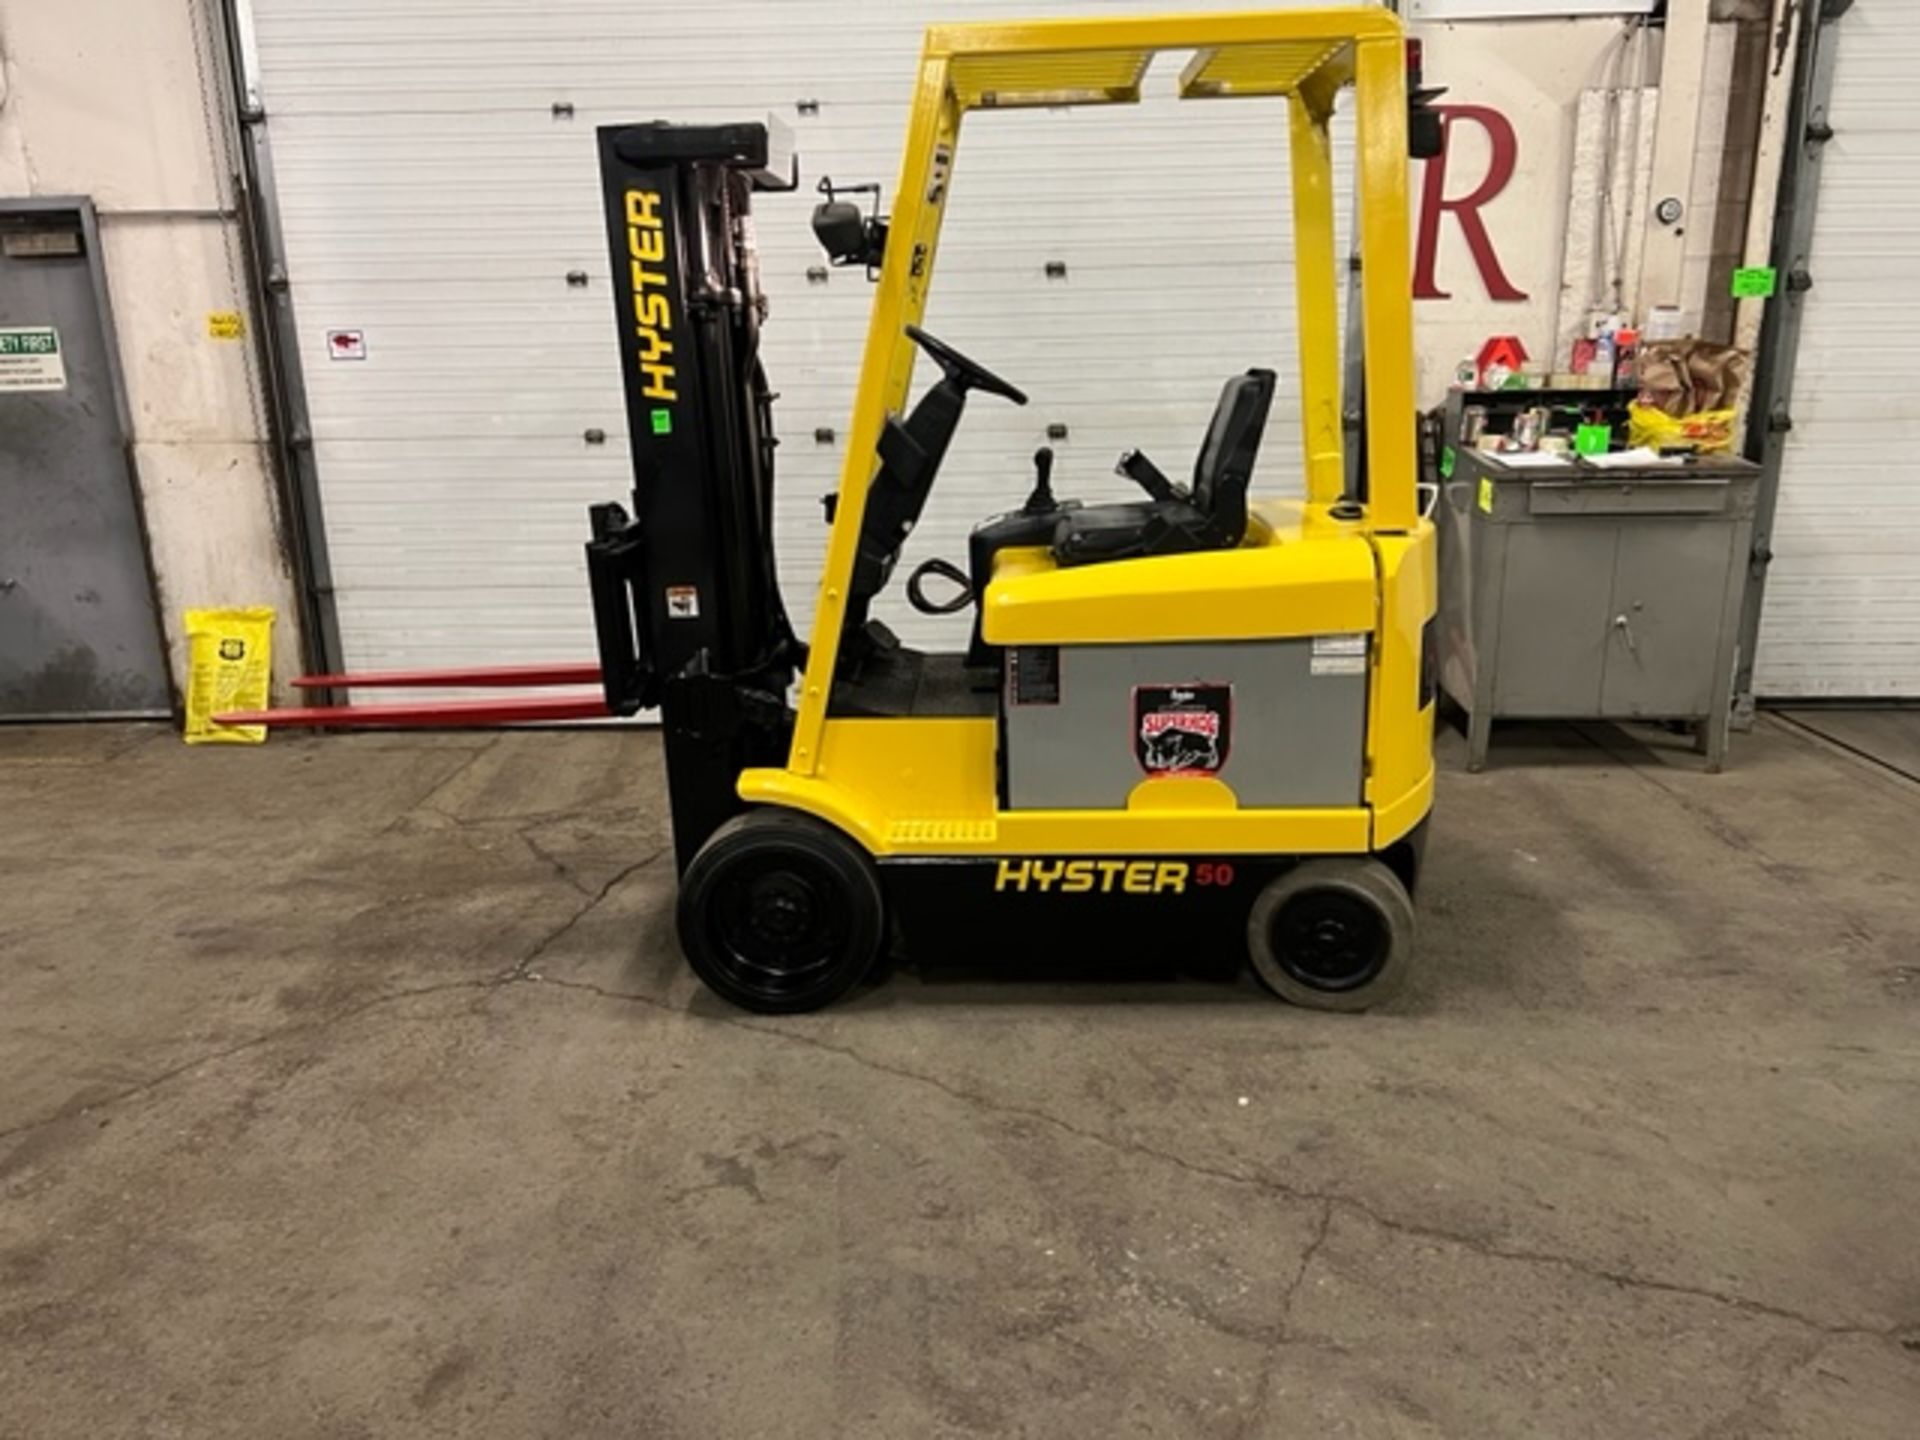 FREE CUSTOMS - MINT Hyster 5,000lbs Capacity Forklift Electric with 3-stage mast with SIDESHIFT